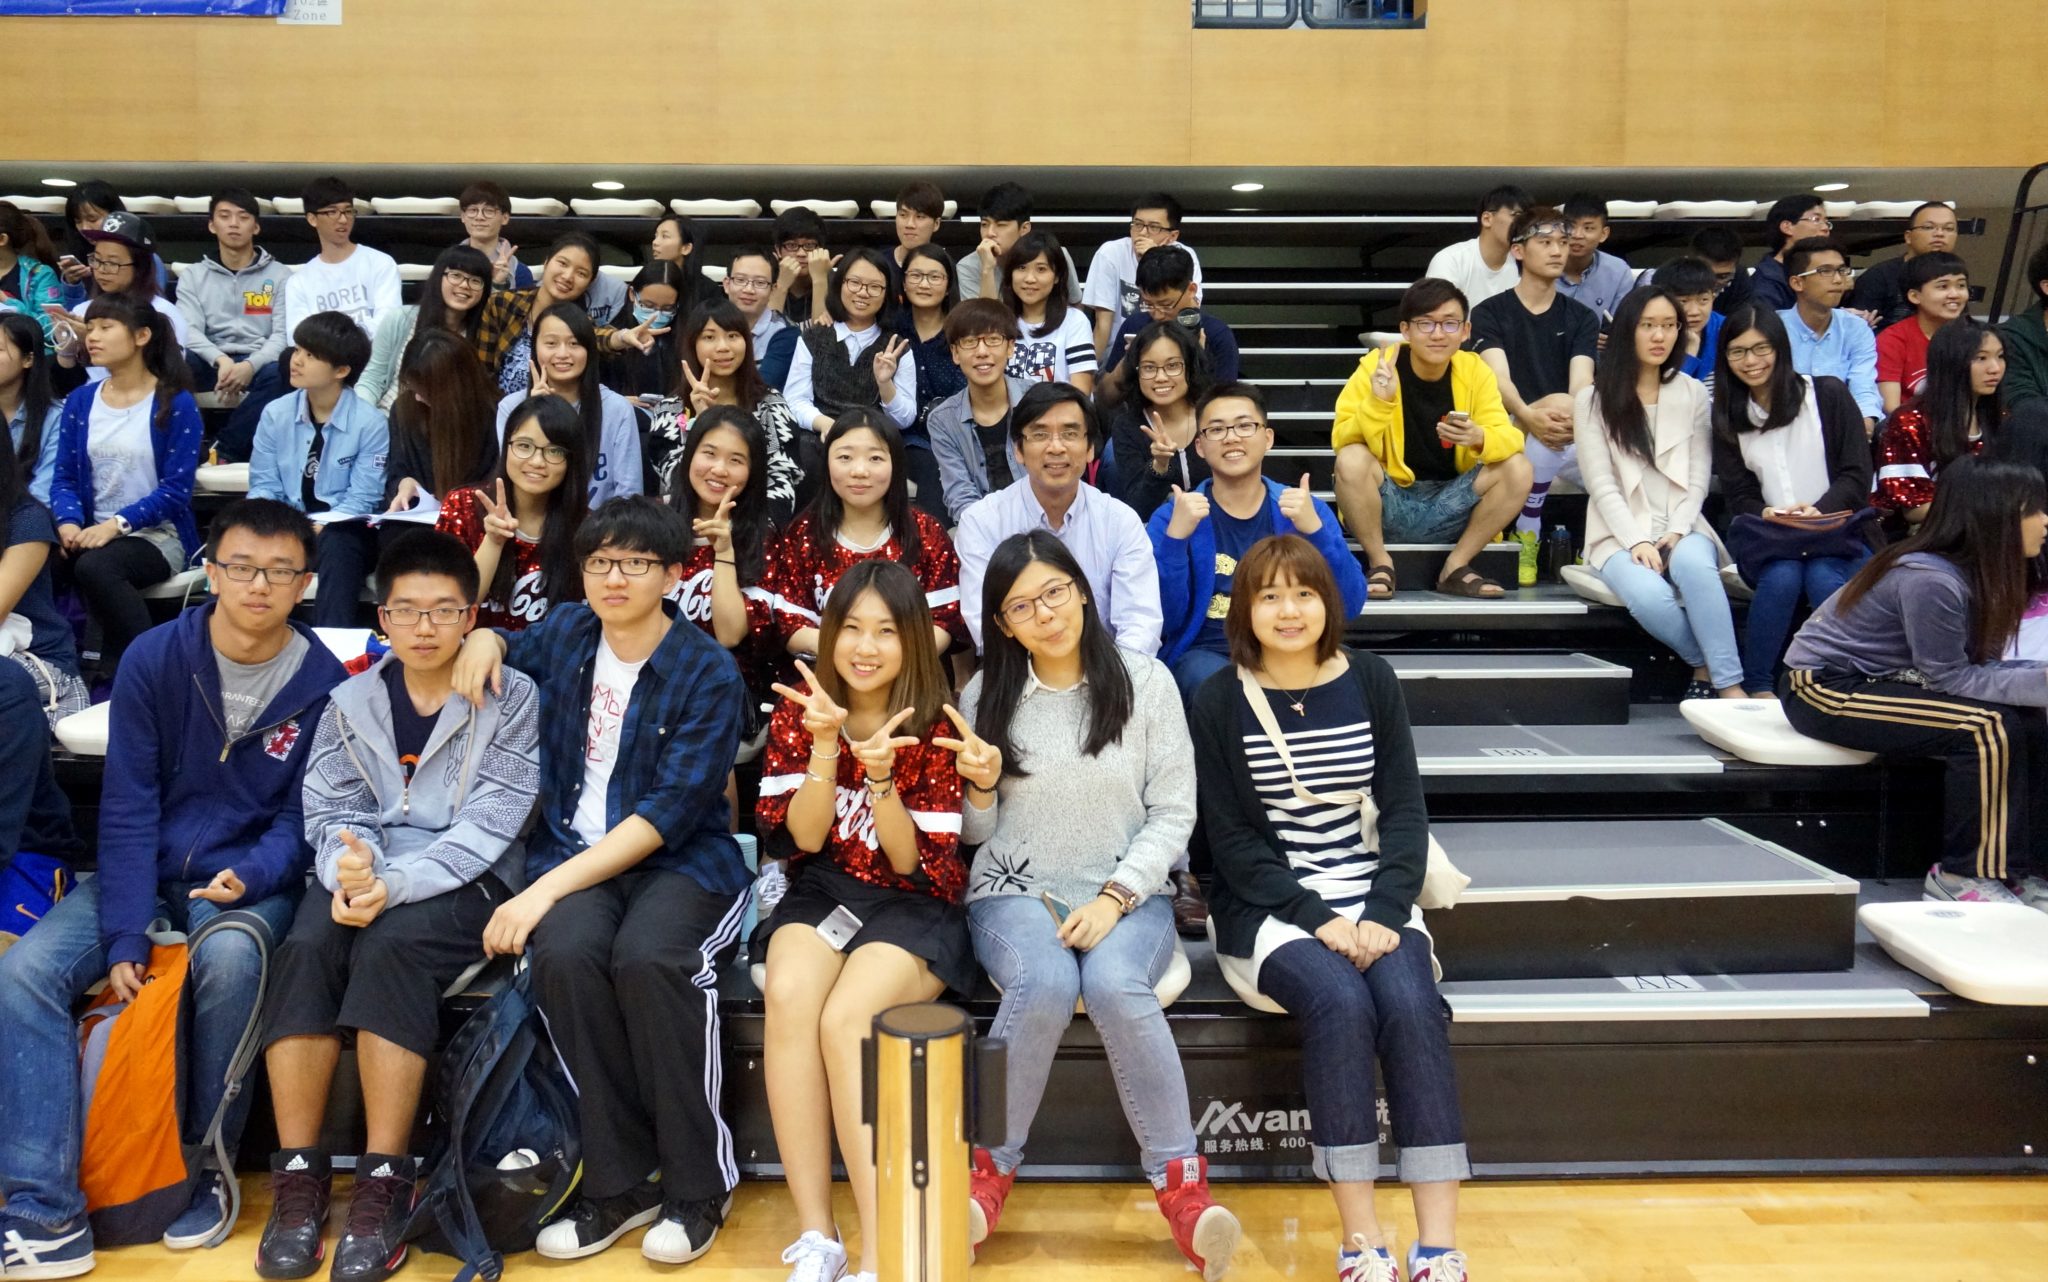 College Master and students attended the tournament finals and cheered for the team. 書院院長和同學們到場觀戰為籃球隊打氣。